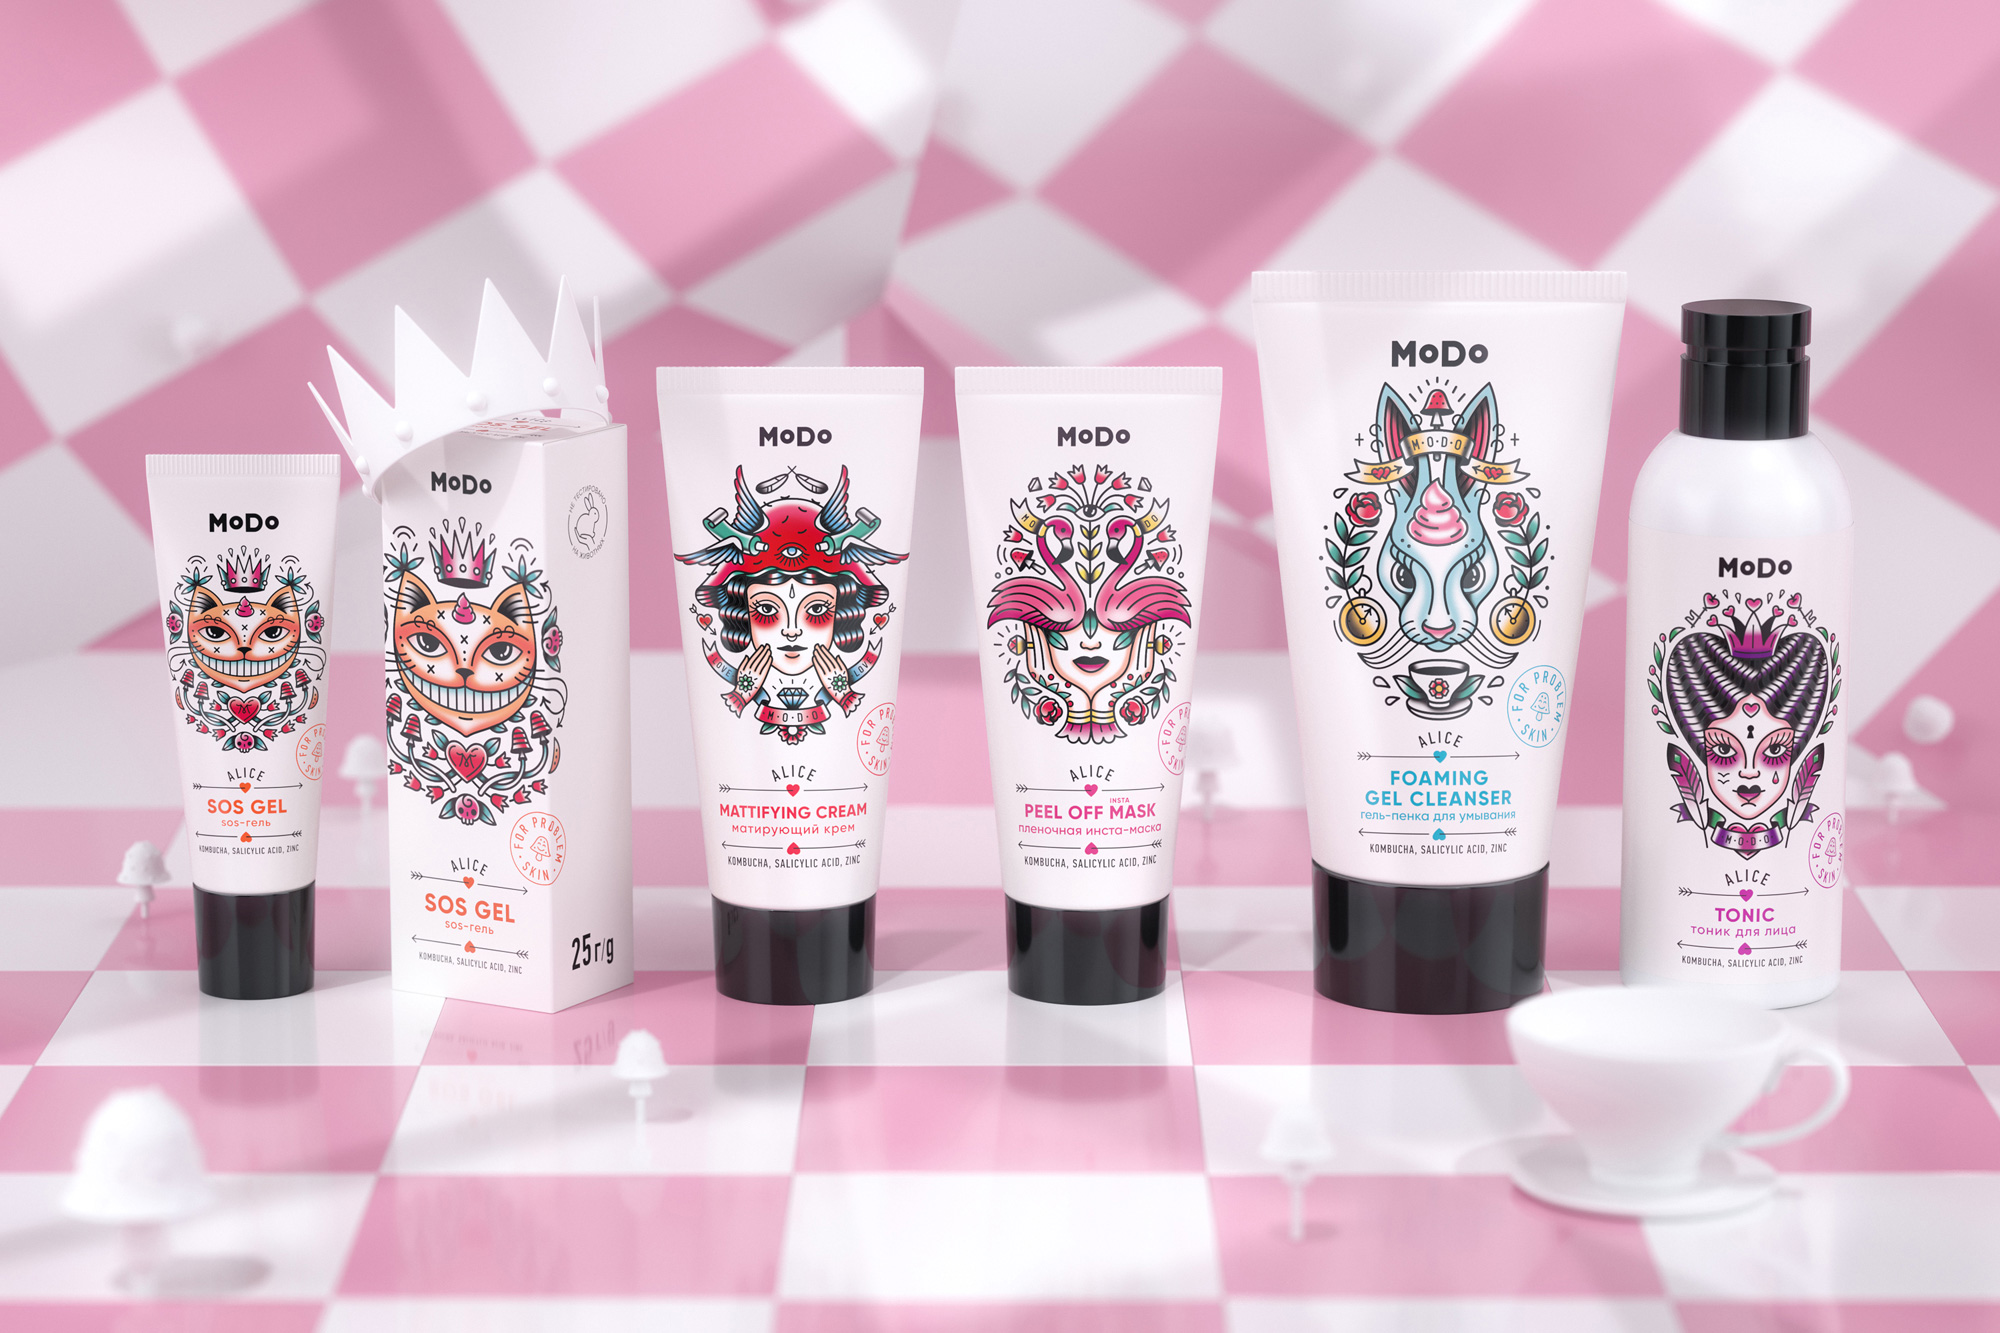 Illustration and Packaging Design for MoDo Alice Сosmetics